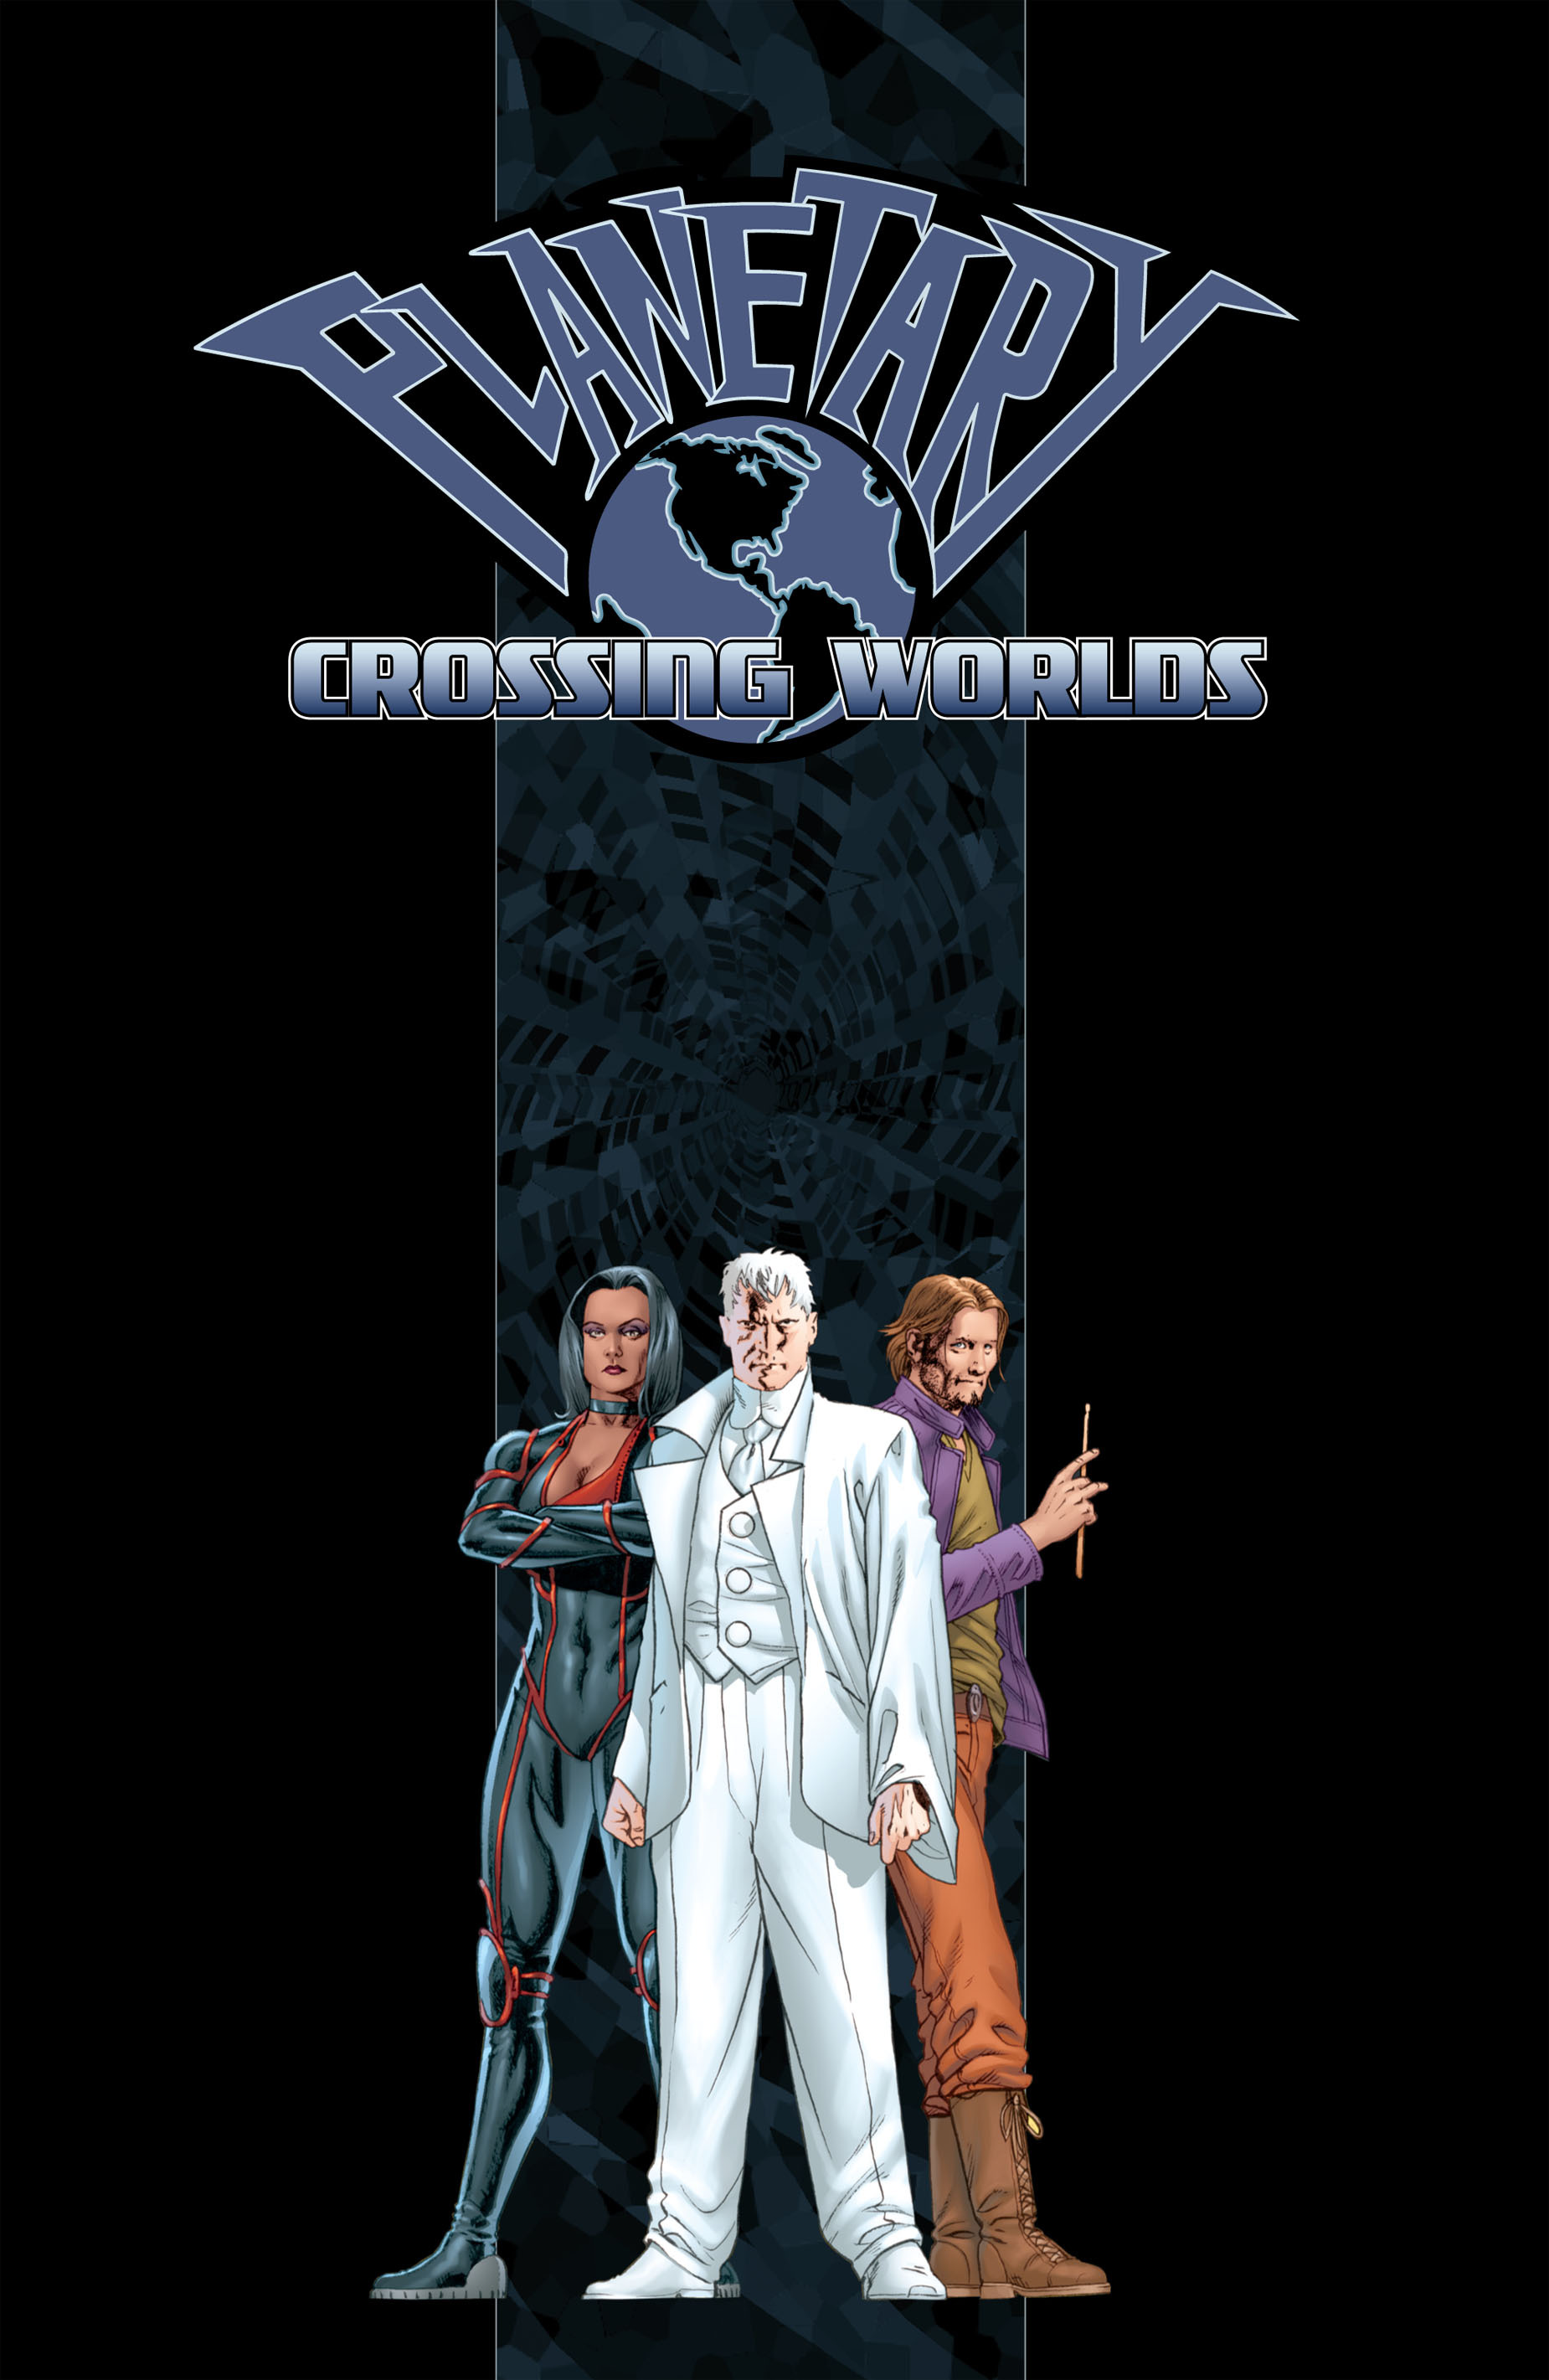 Read online Planetary Crossing Worlds comic -  Issue # TPB - 2